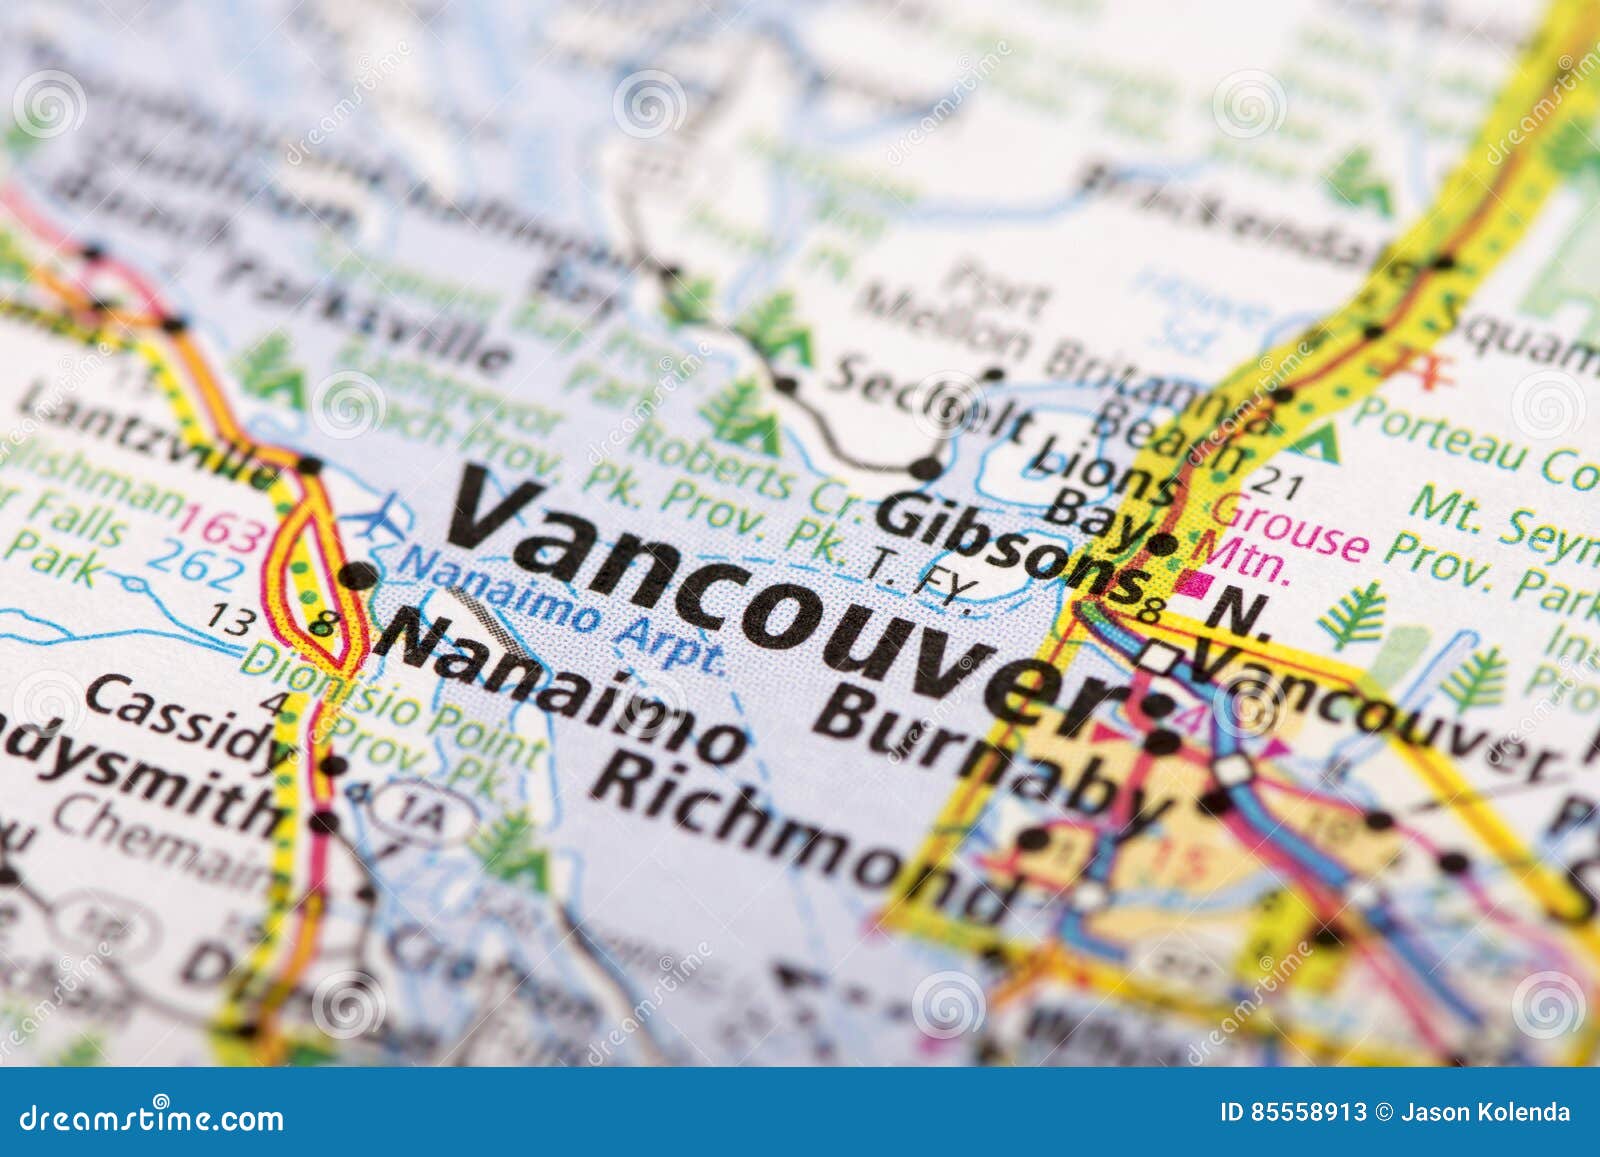 vancouver on map